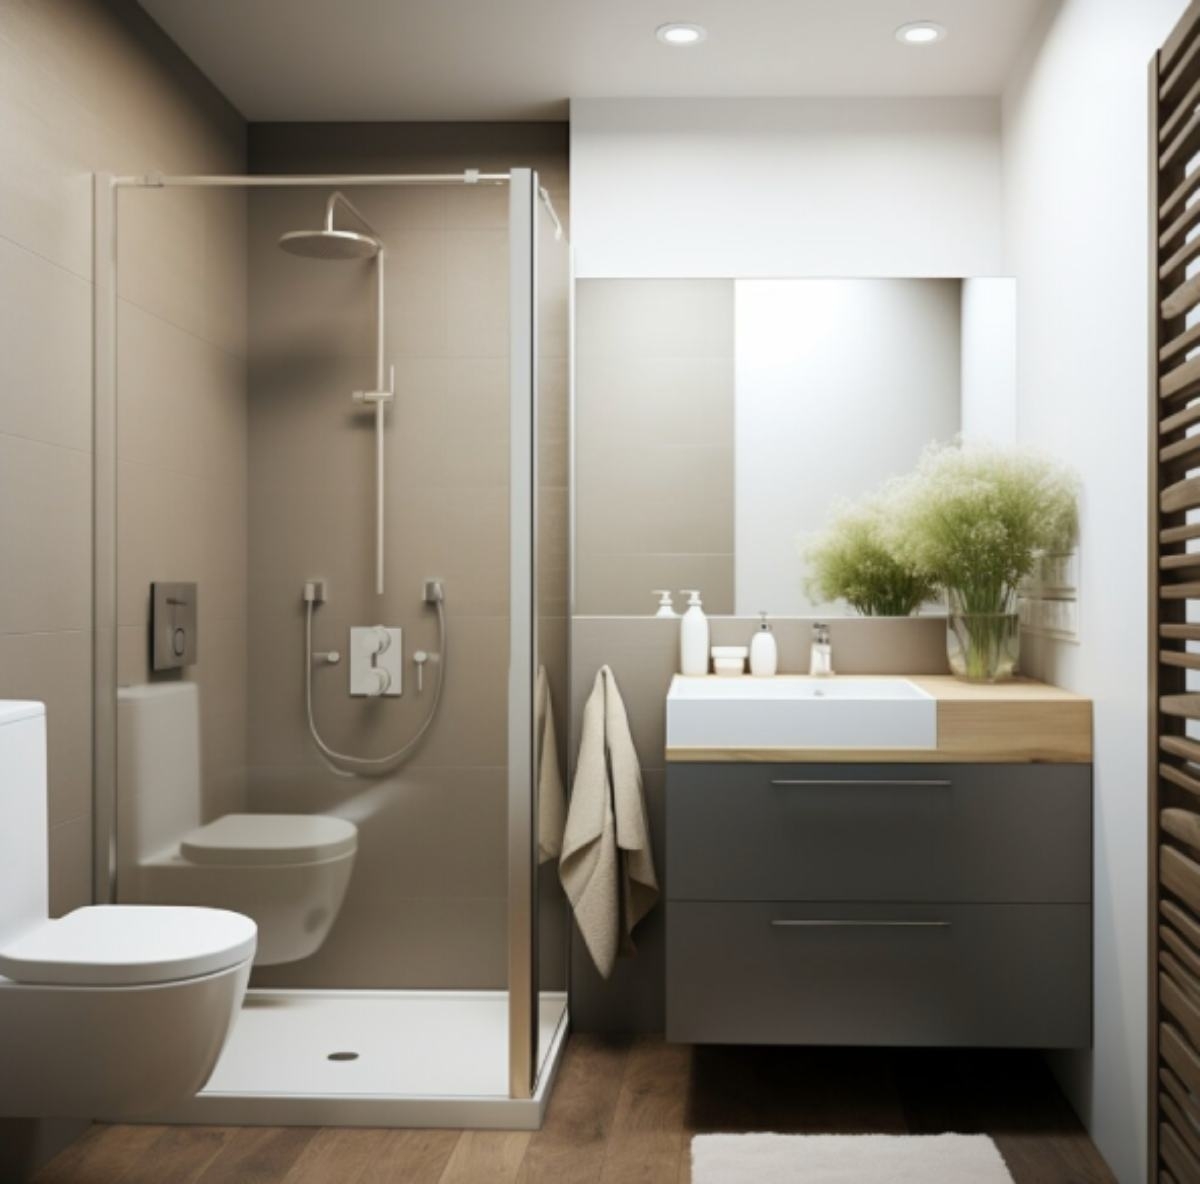 bathroom space with common appliances, toilet and shower